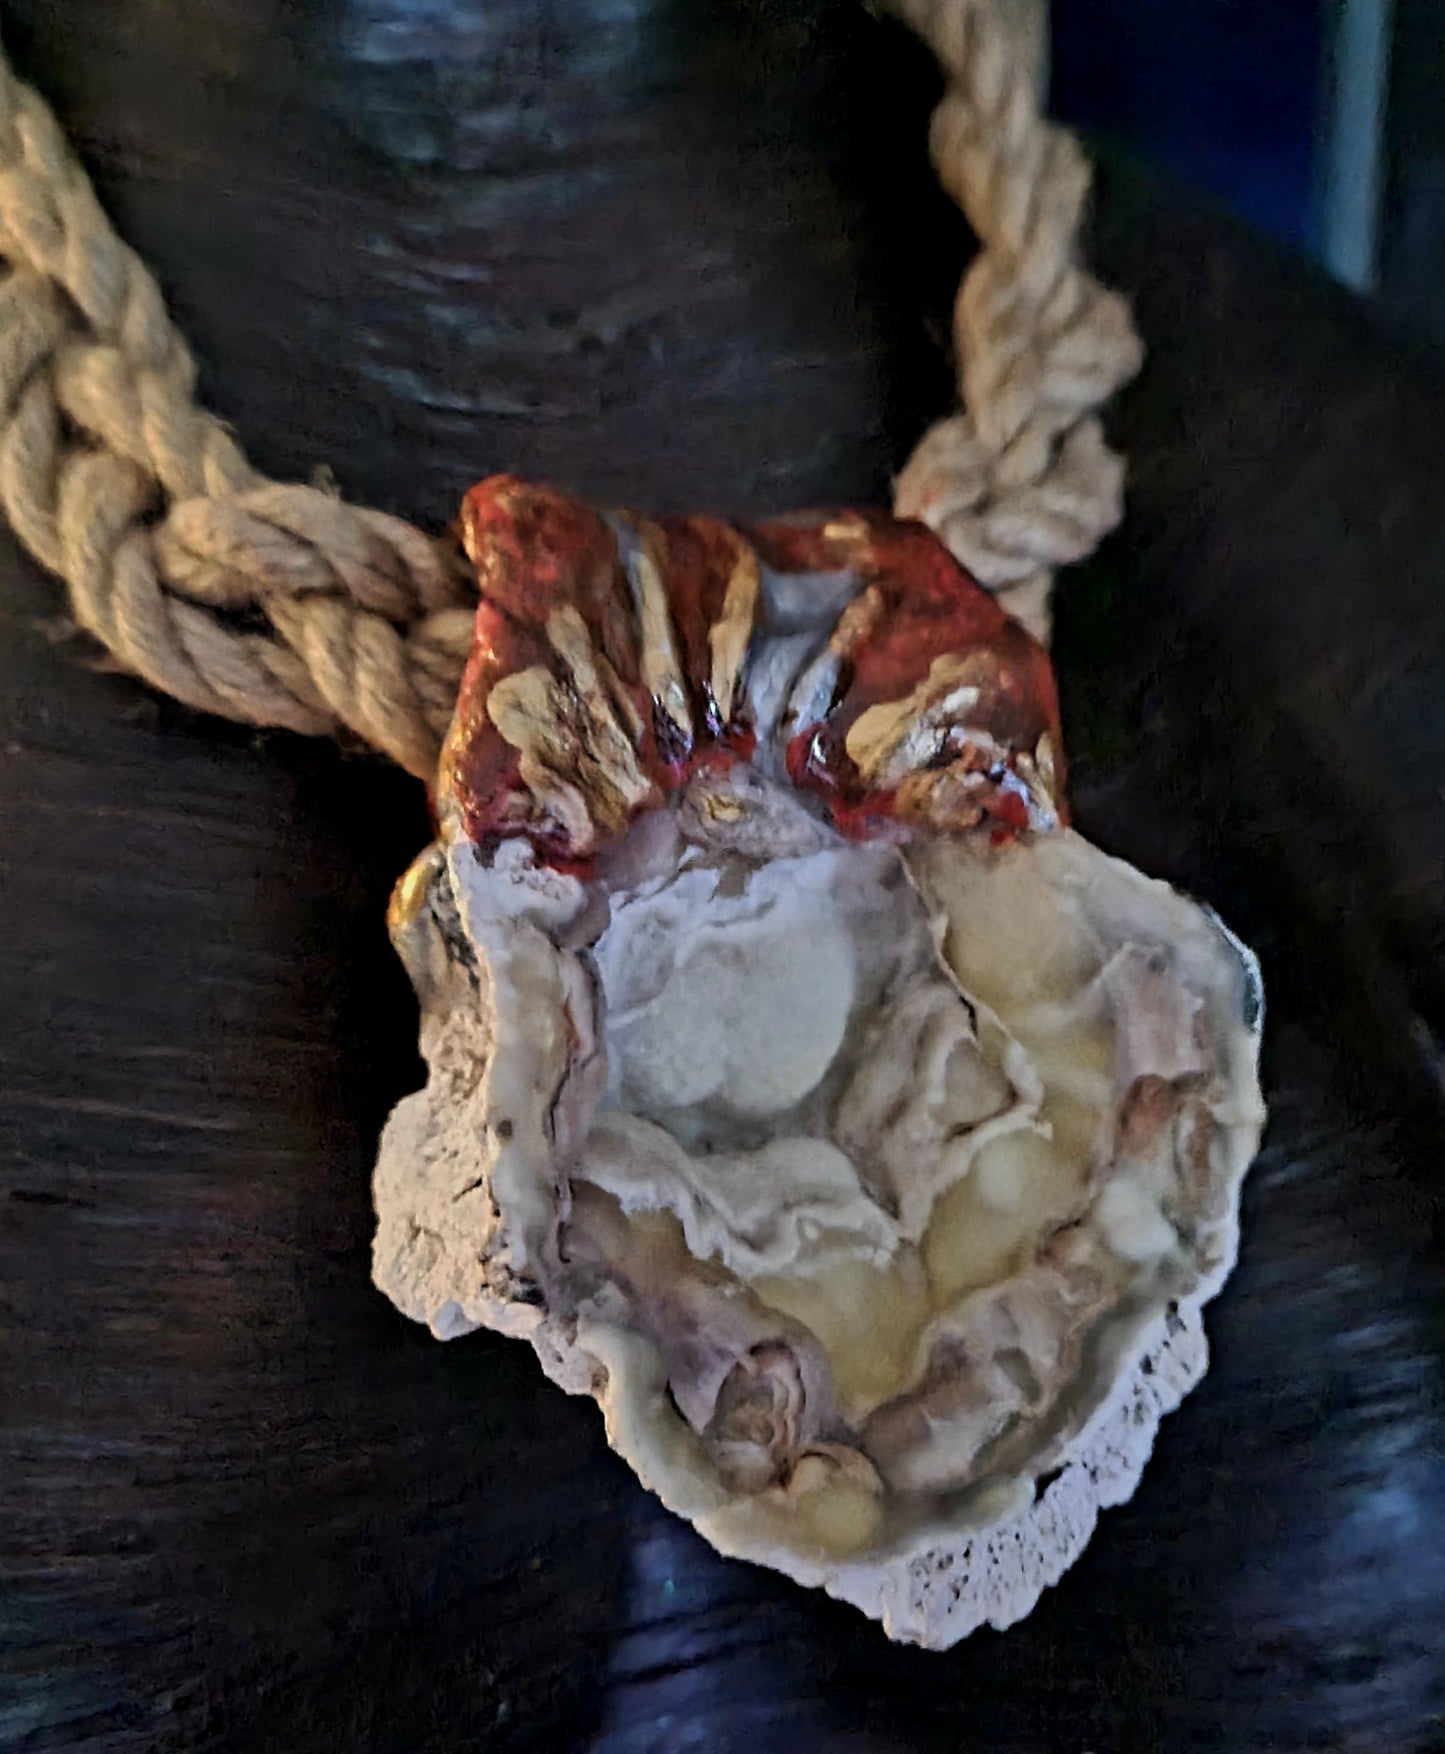 Rustic Sculpted Geode Unisex Statement Pendant With Braided Hemp Rope, Jeans Jewelry, Men's Bohemian Couture Talisman, Masculine Crystal Cave Amulet